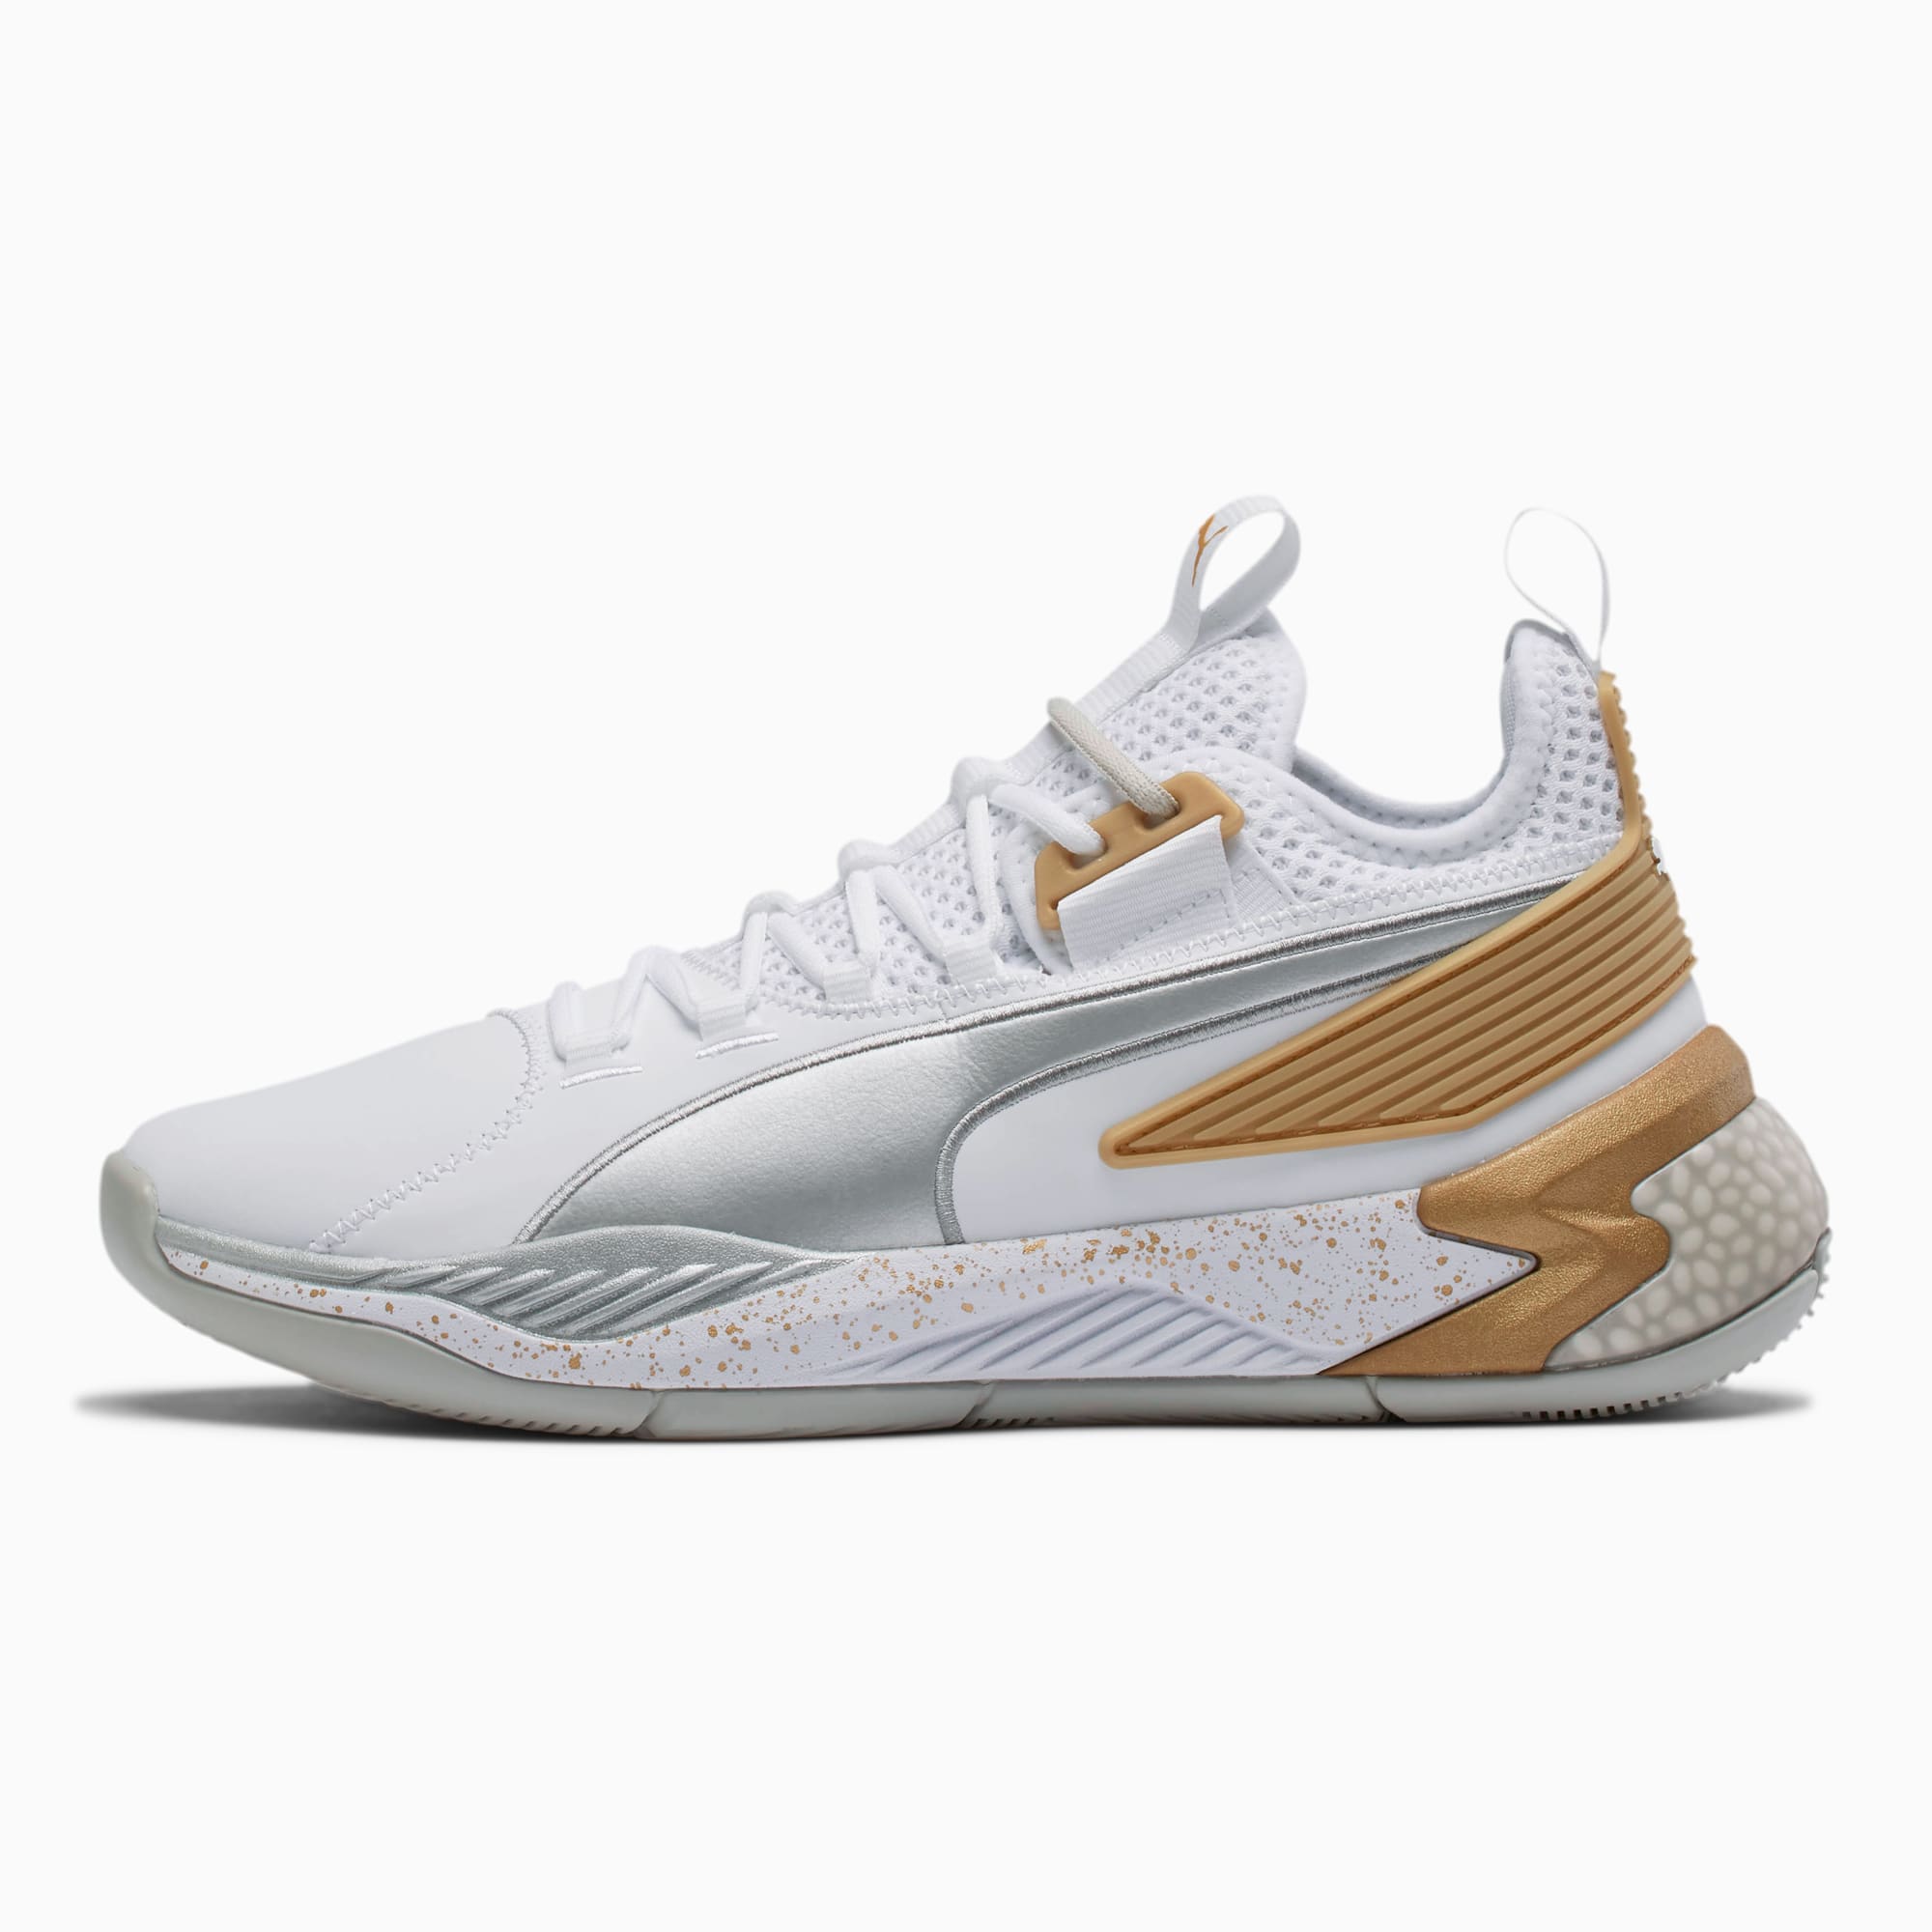 puma basketball shoes price philippines